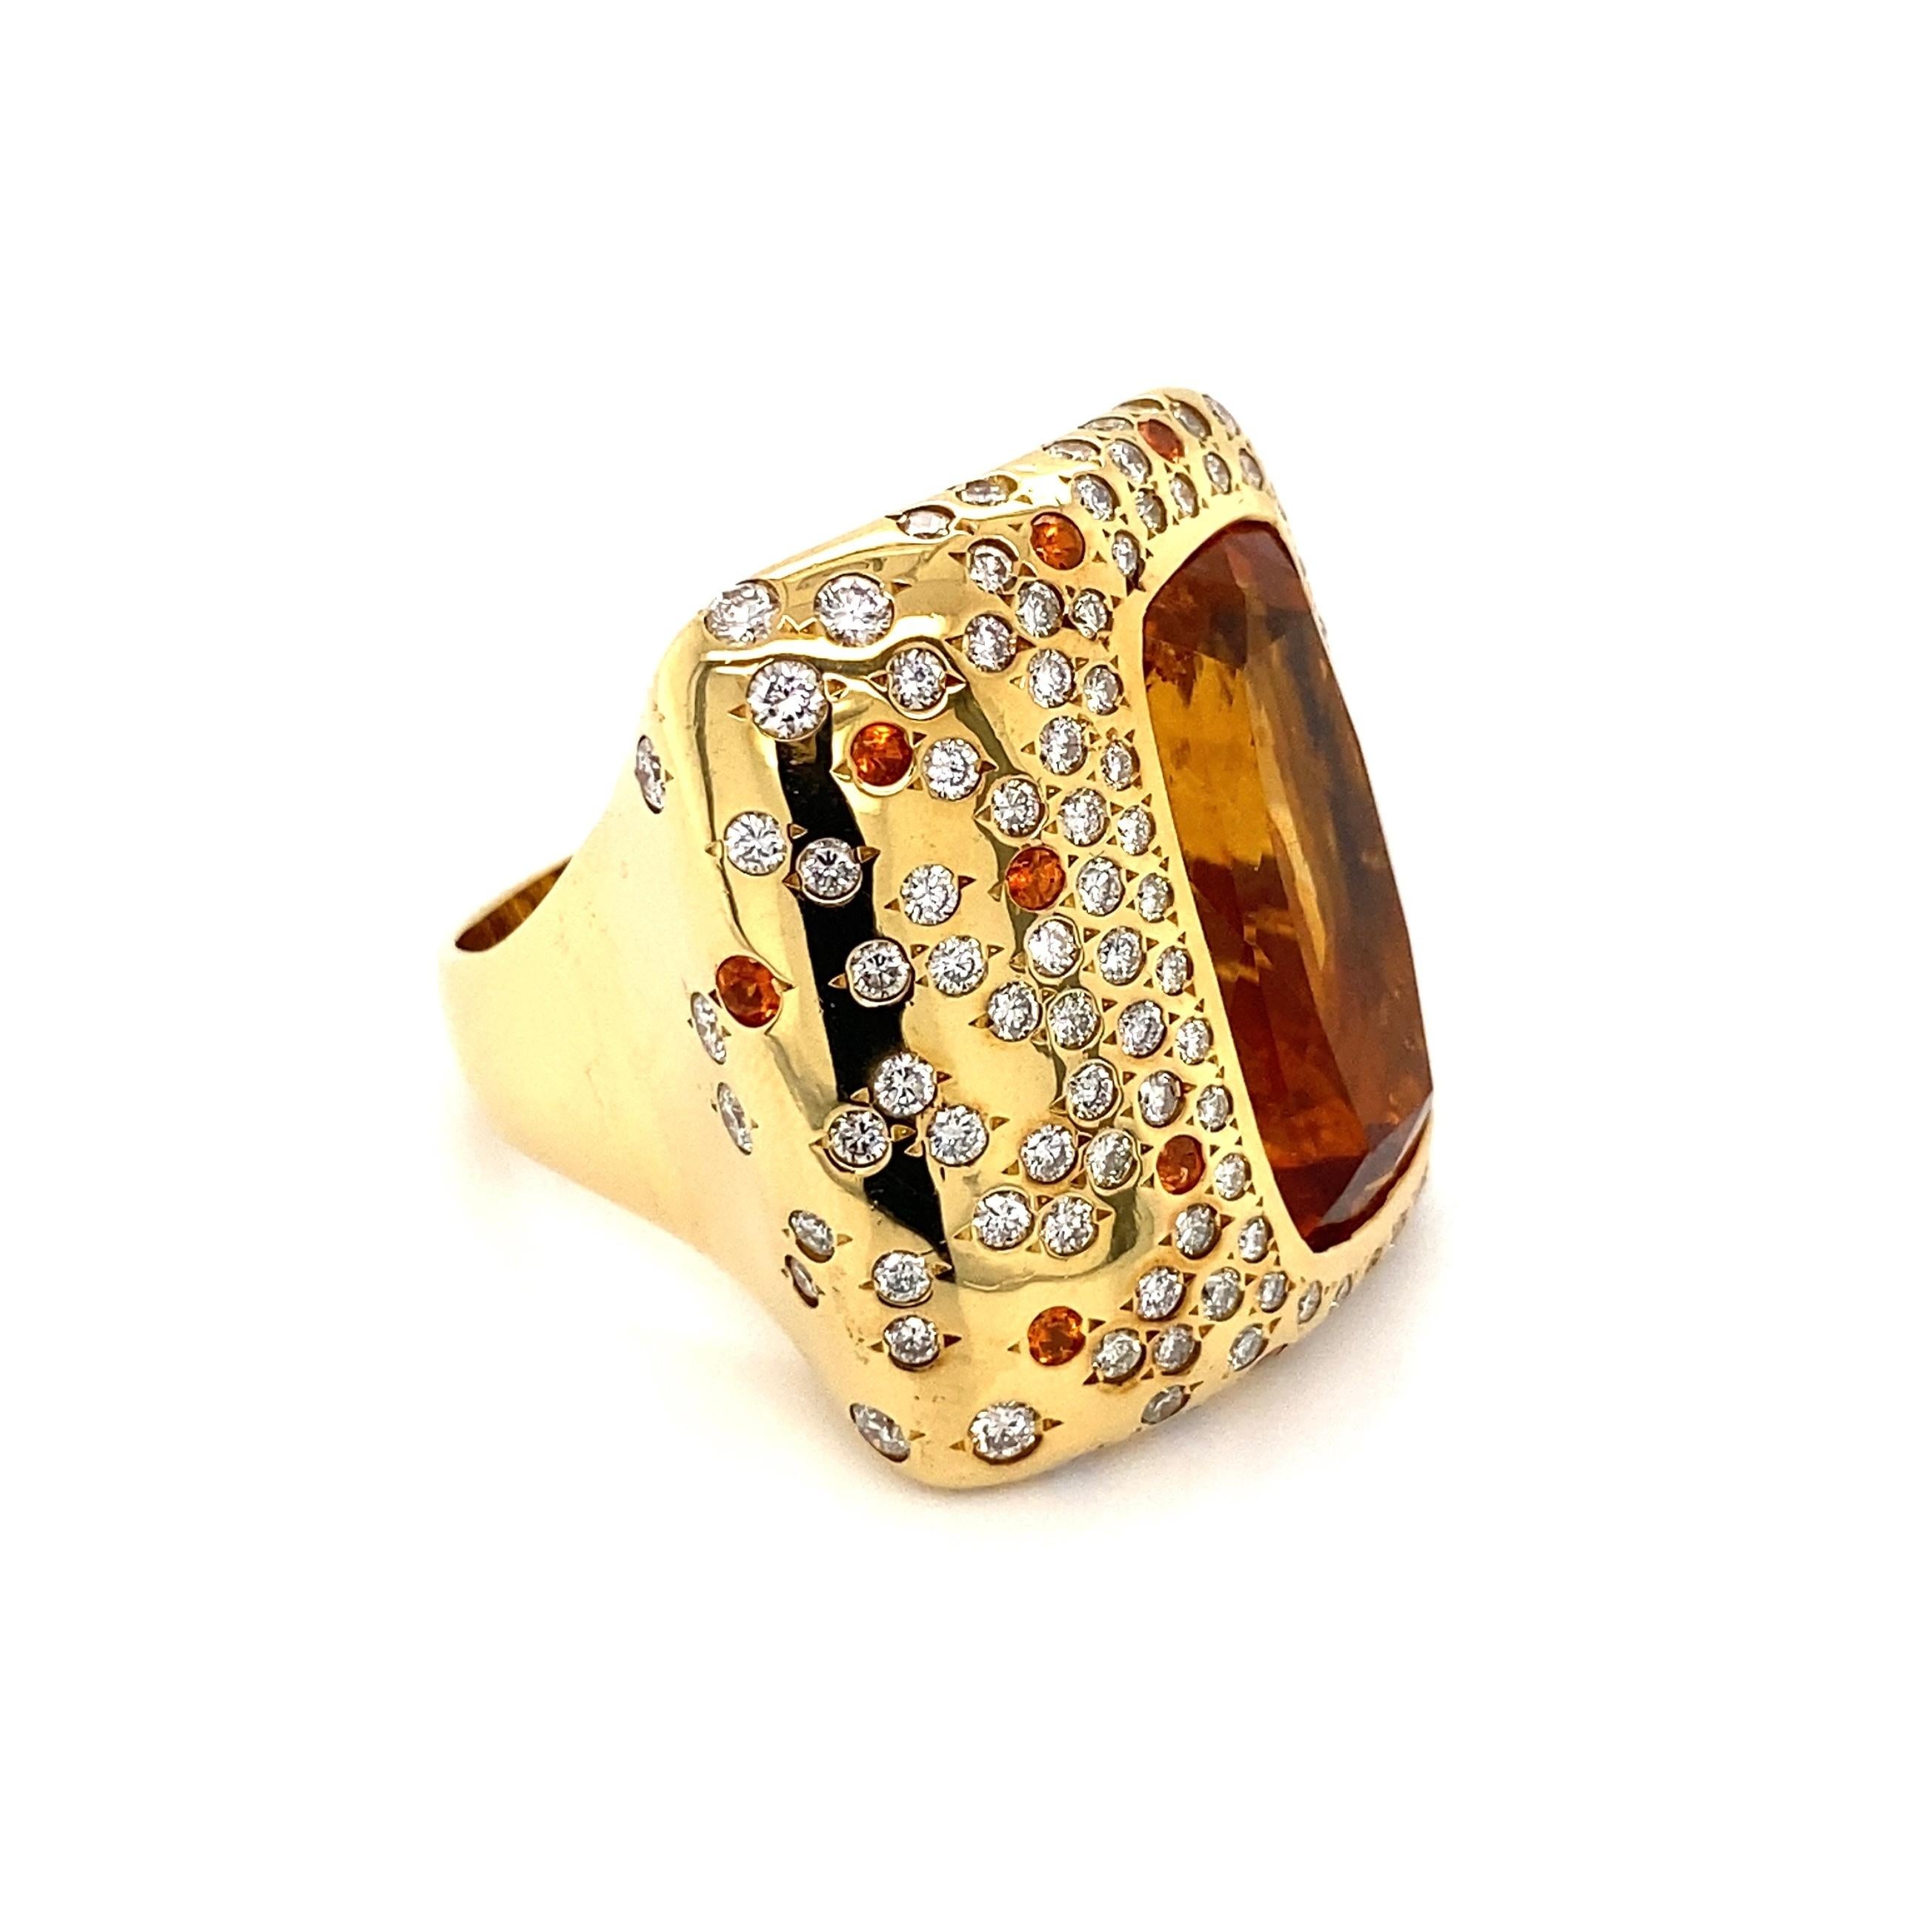 
Simply Fabulous, Timeless and finely detailed Citrine, and Diamond and Spessartite Garnet Gold Cocktail Ring, center securely nestled with a 13.50 Carat Citrine, surrounded and accented by Diamonds weighing approx. 2.70tcw and Spessartite Garnet